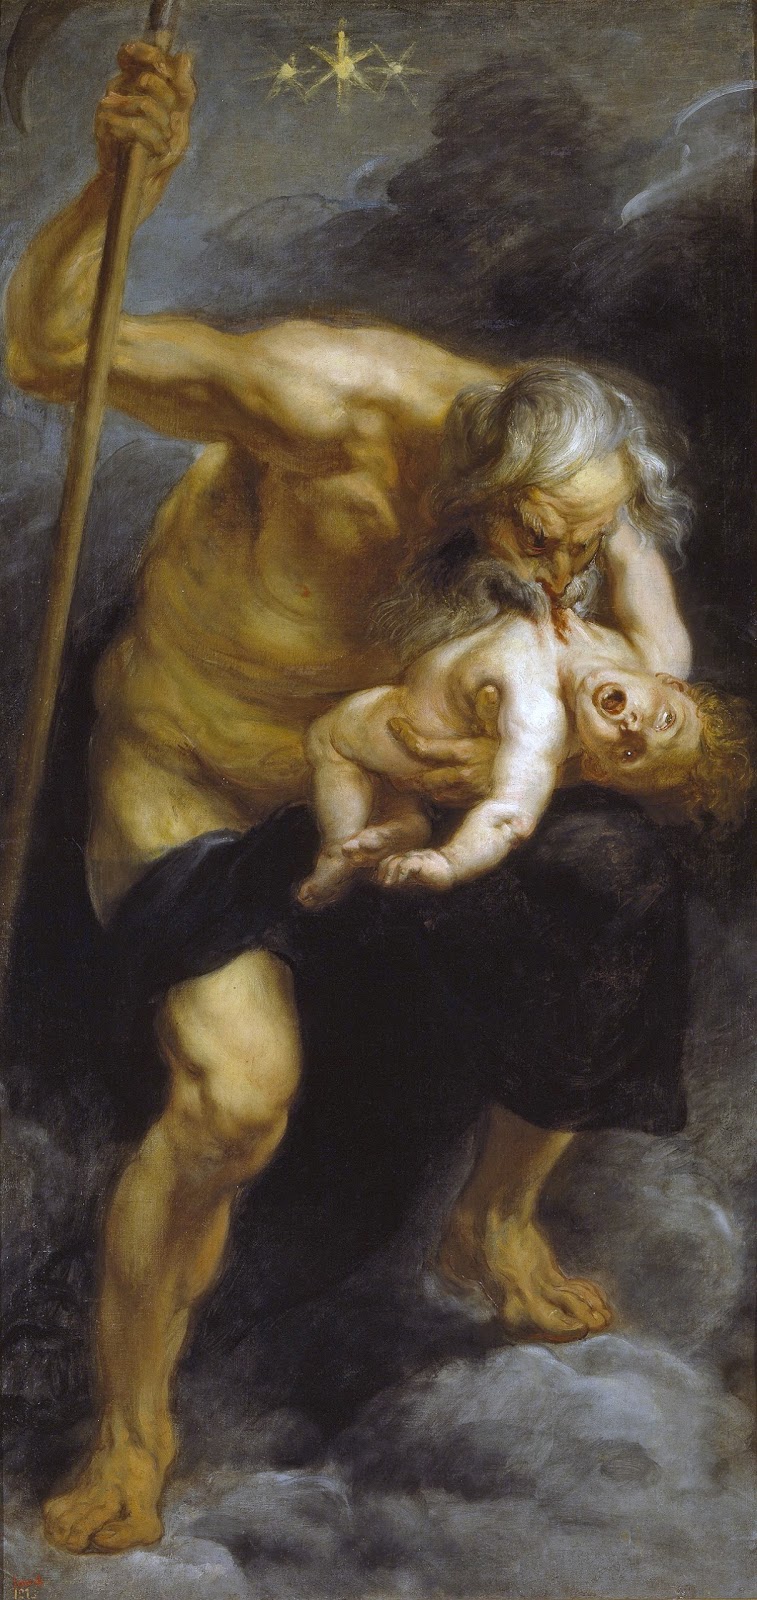 Poetry and Miscellaneous Yap.......... an Irish poet's blog : Saturn devouring his son